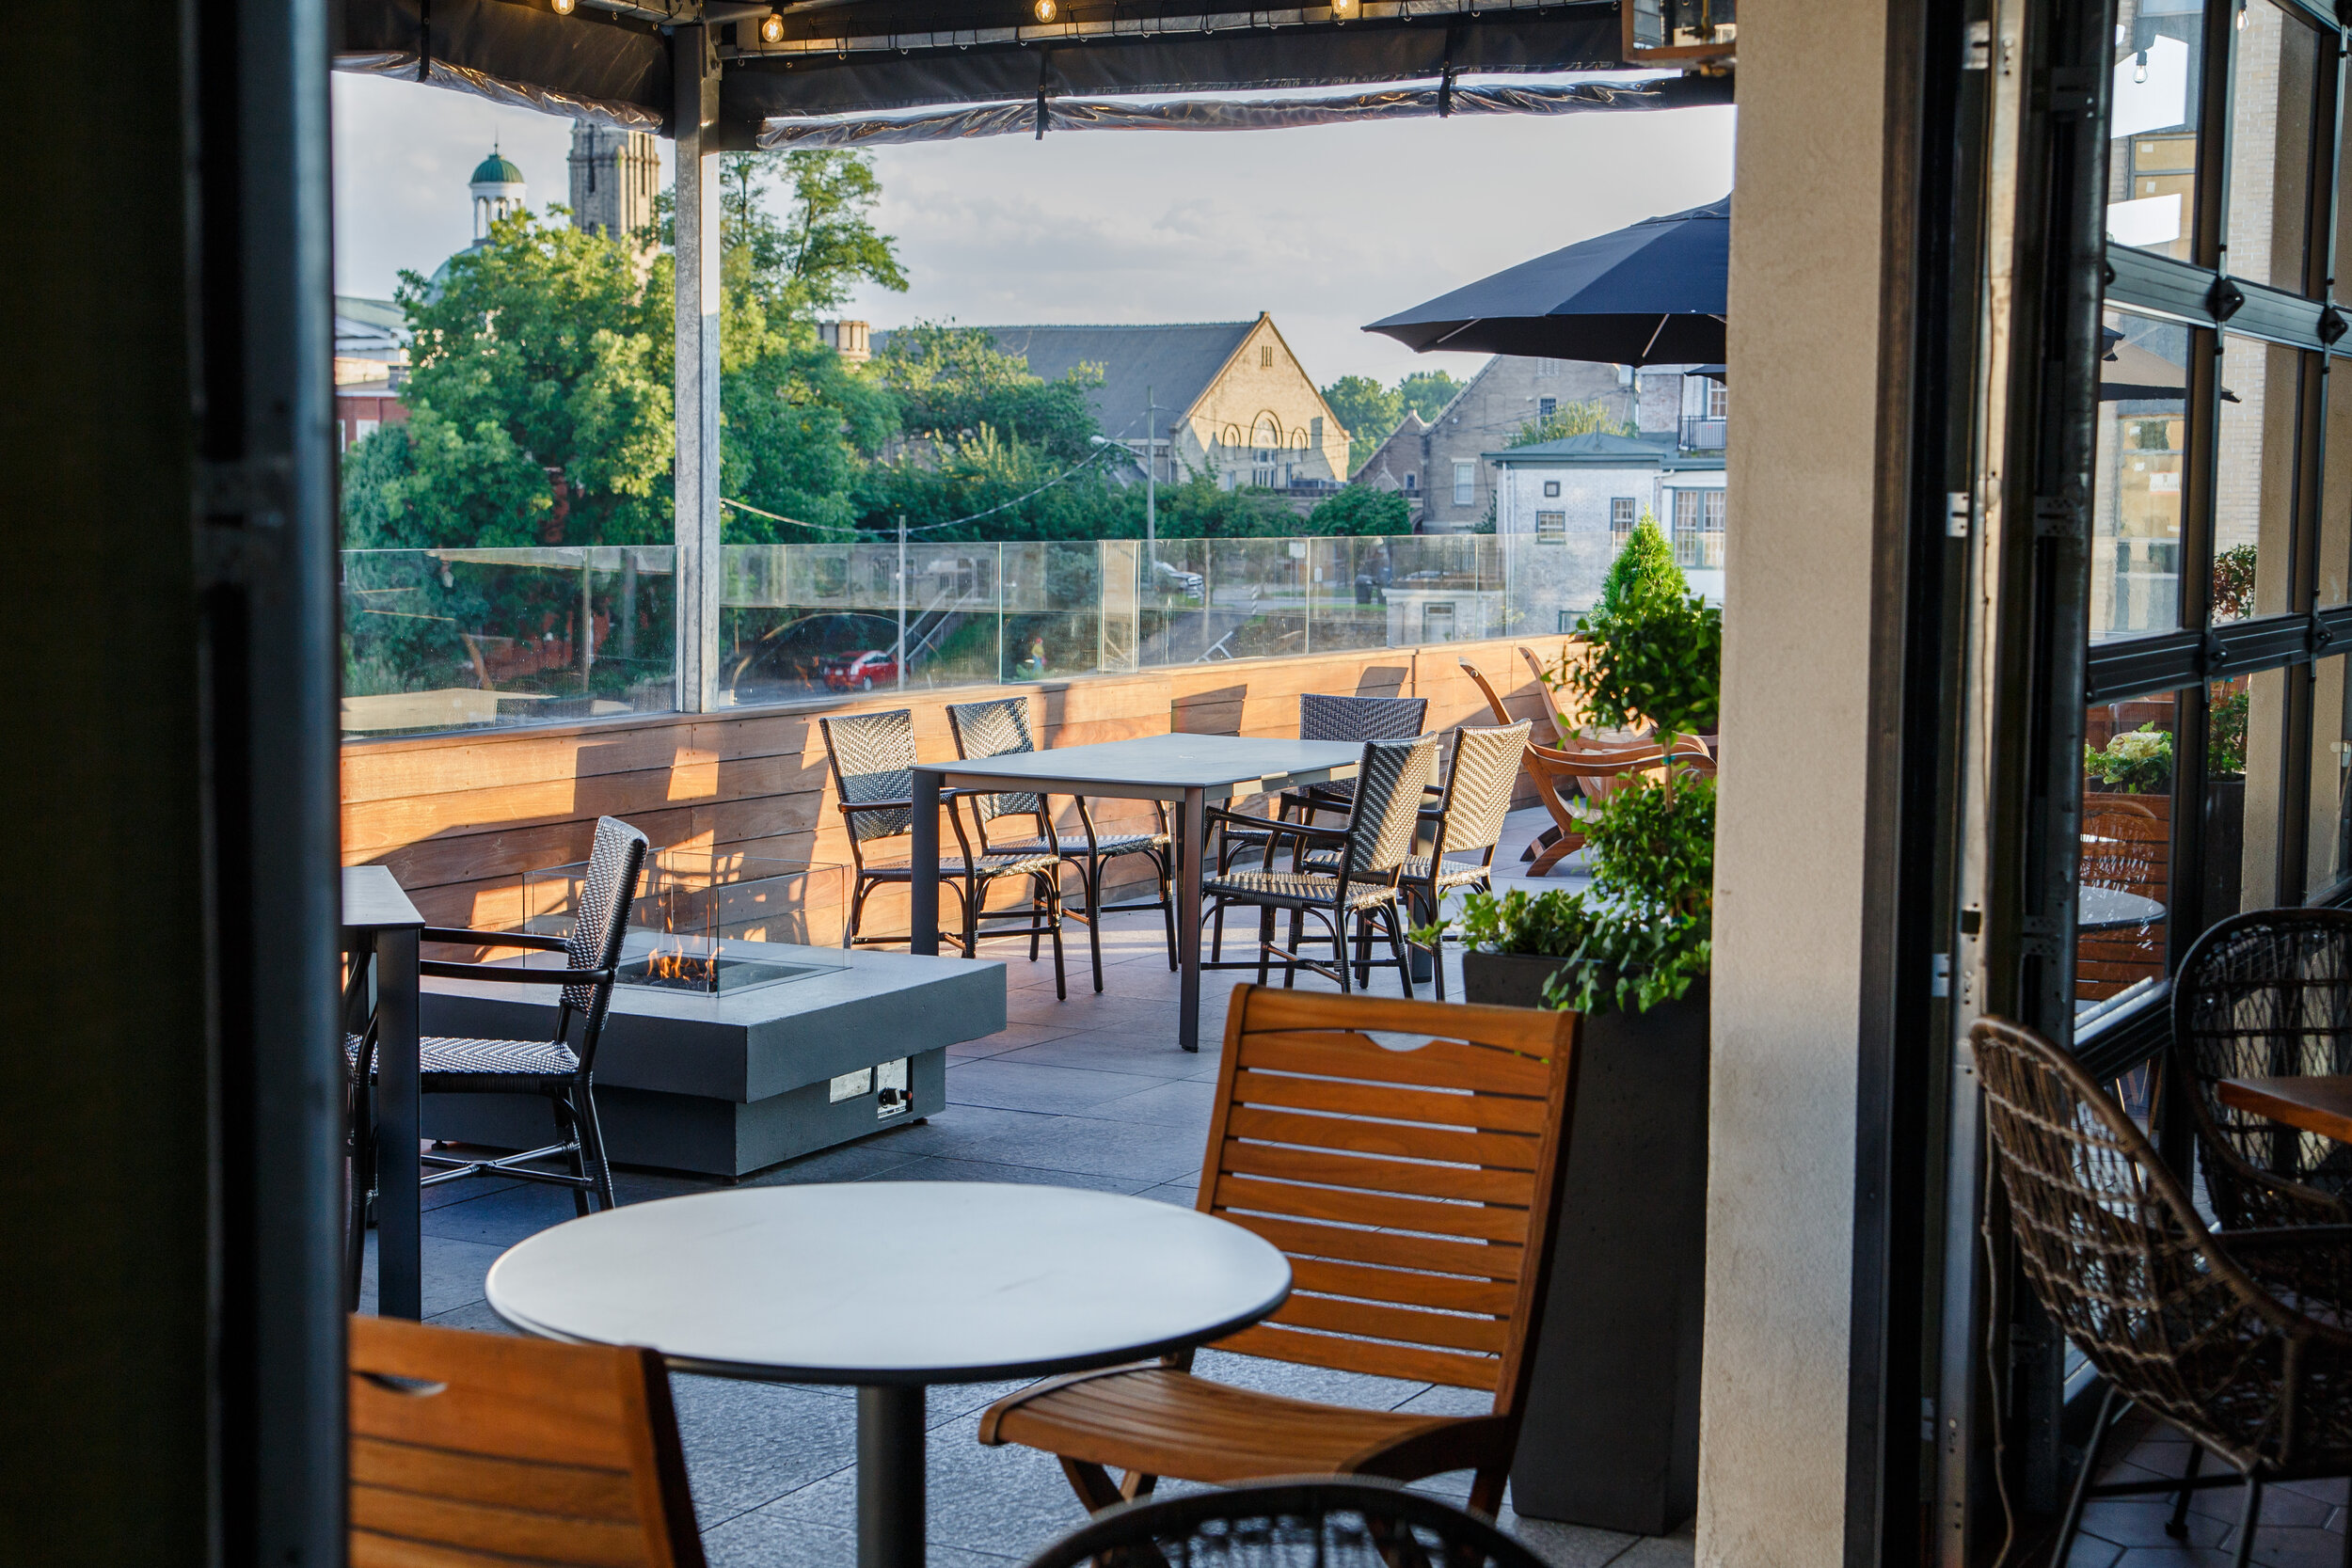  Downtown Lynchburg, Virginia   Dinner with a View    Make a Reservation →  